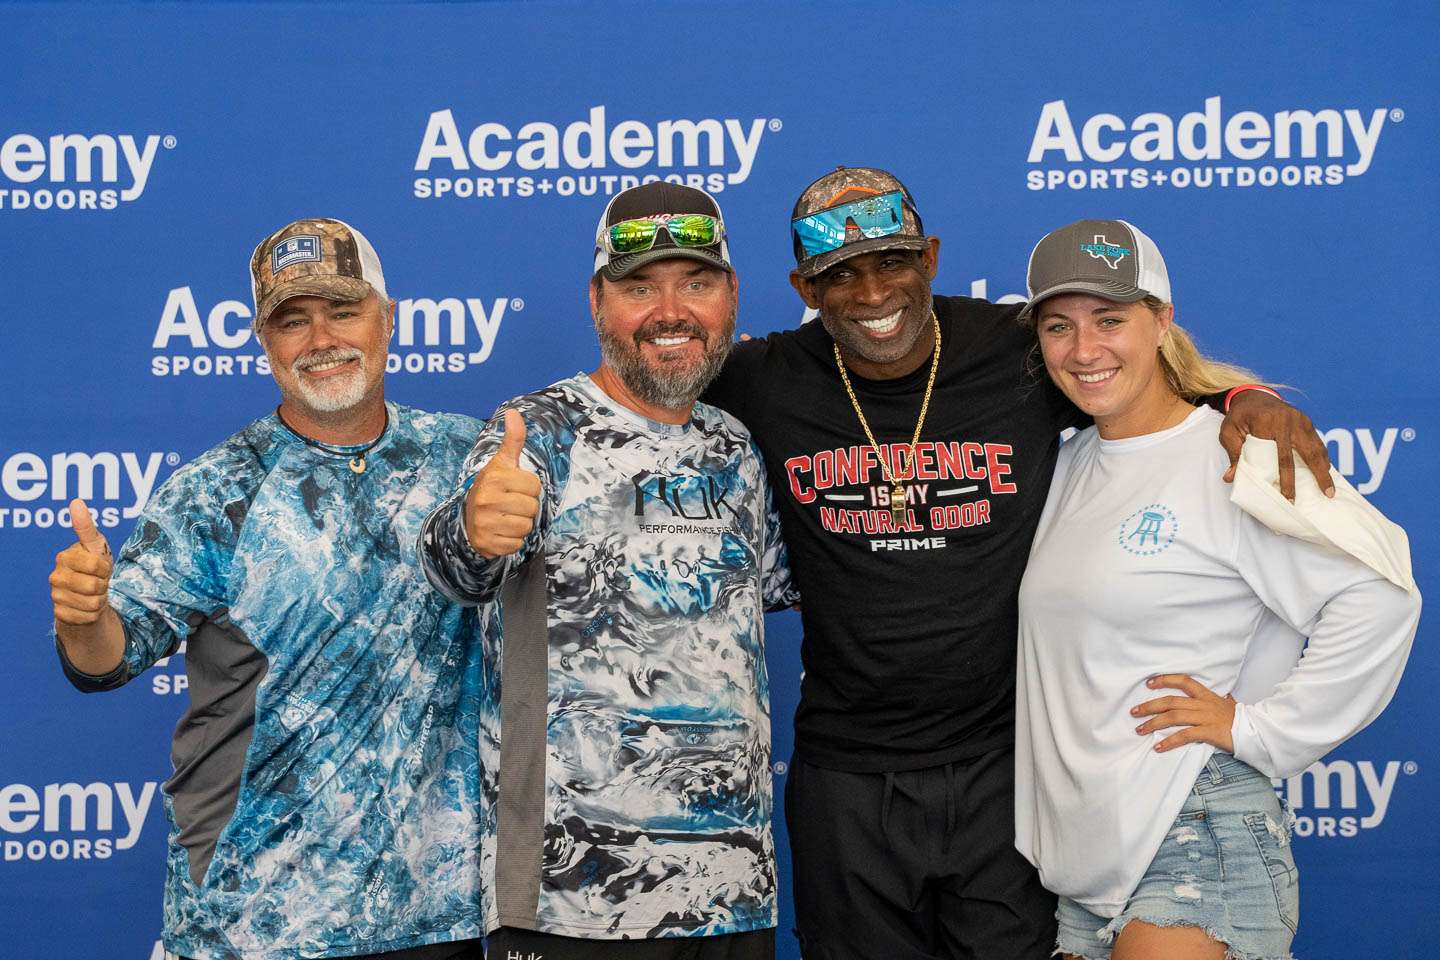 He really enjoyed doing that today, because his team won. Elite Series angler Greg Hackney probably helped a little bit, along with James Hall and Sydney Wells. 